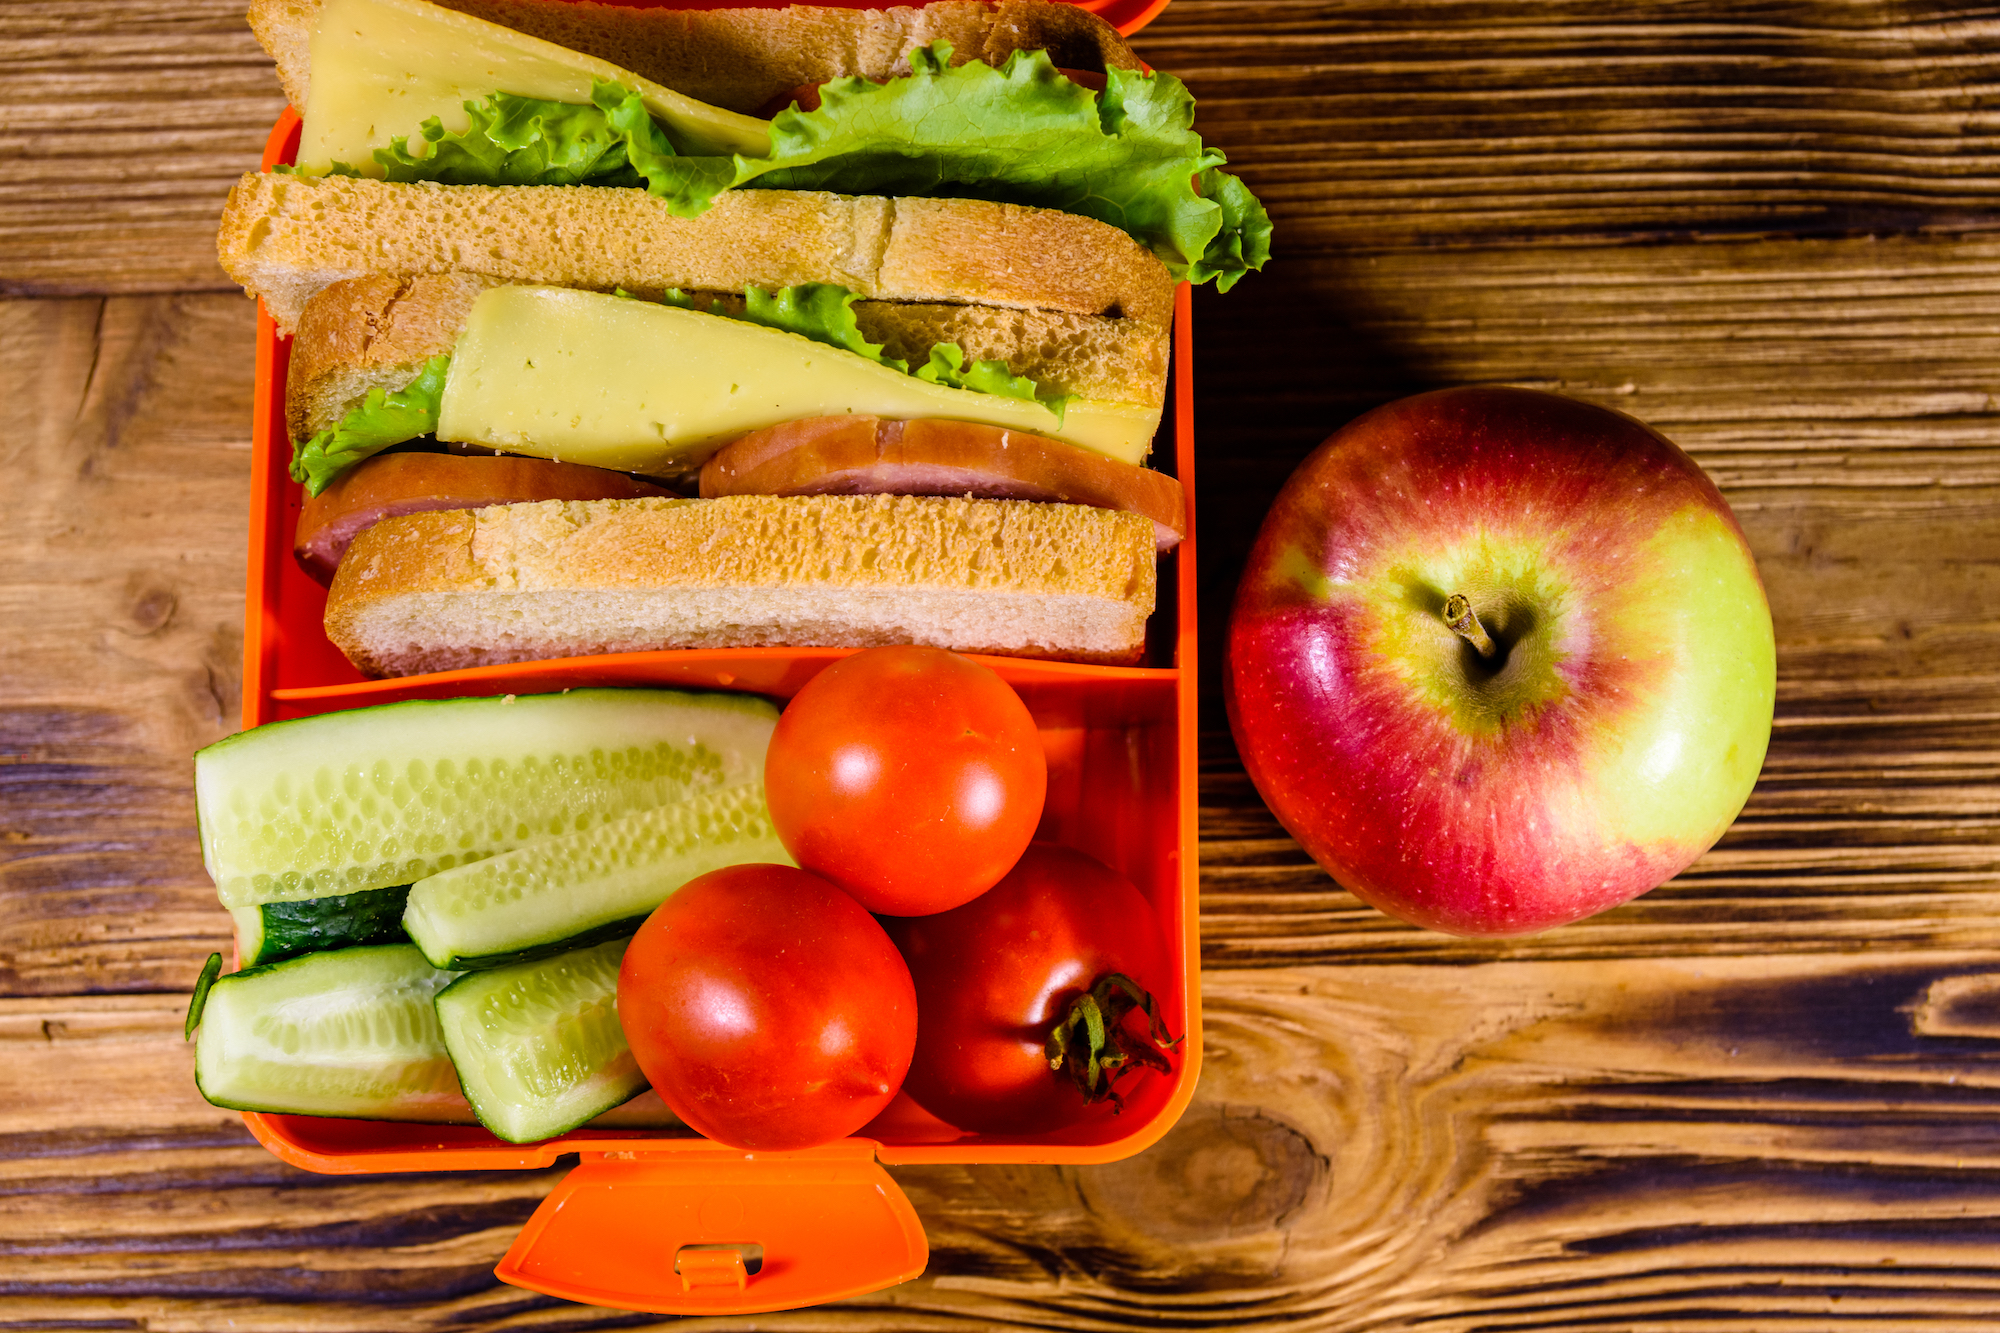 Transform your eating habits with nutrition counseling